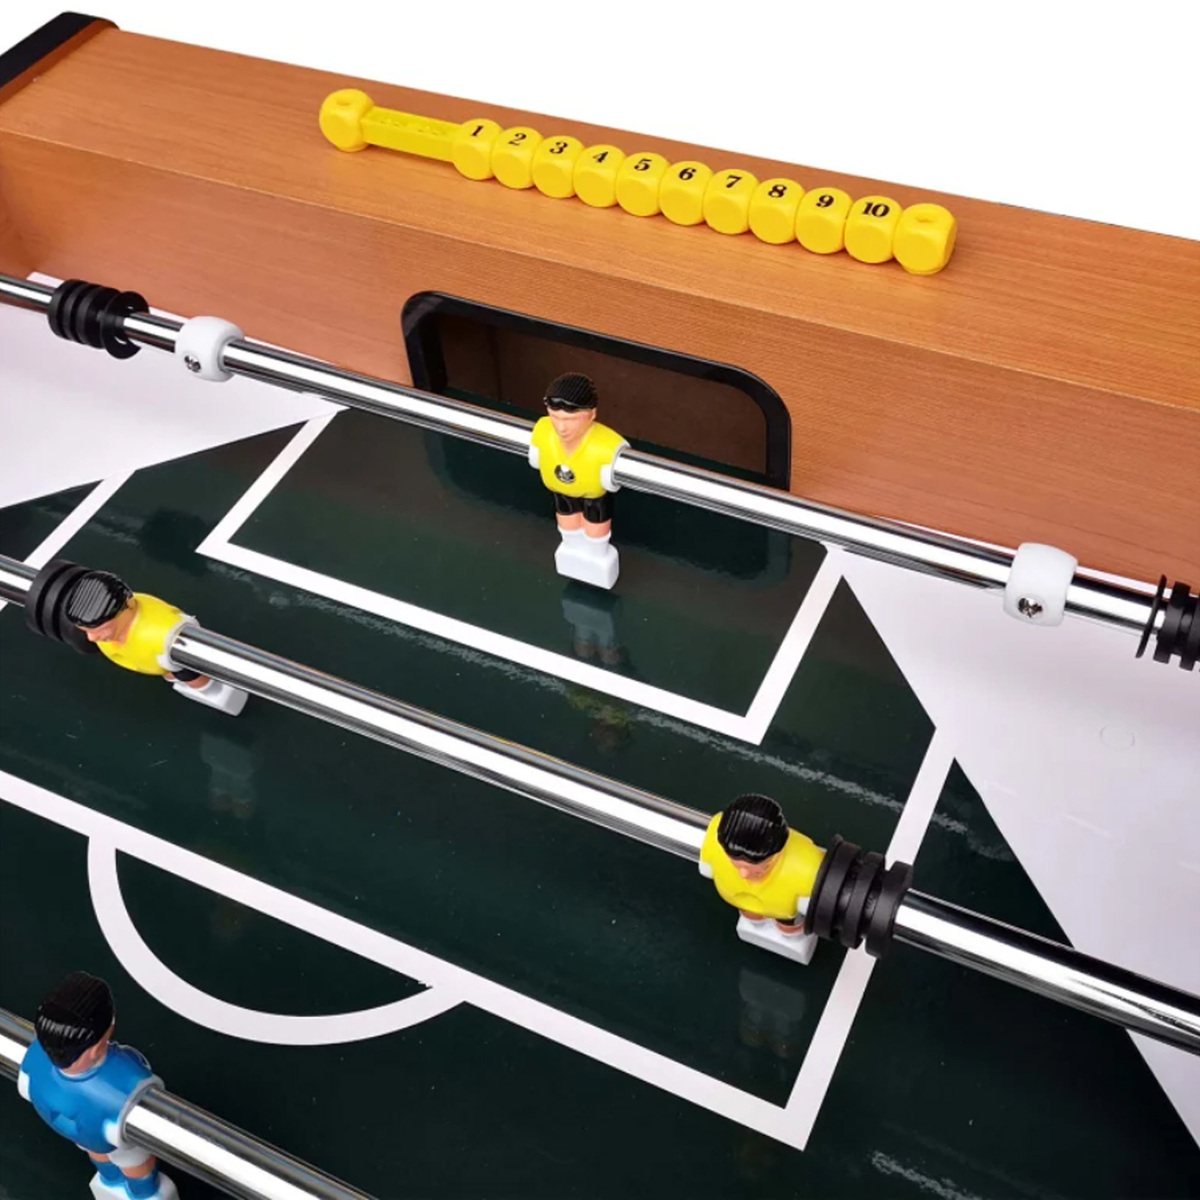 Toronto Soccer Table, 5 ft, Wooden, GF016-WOOD